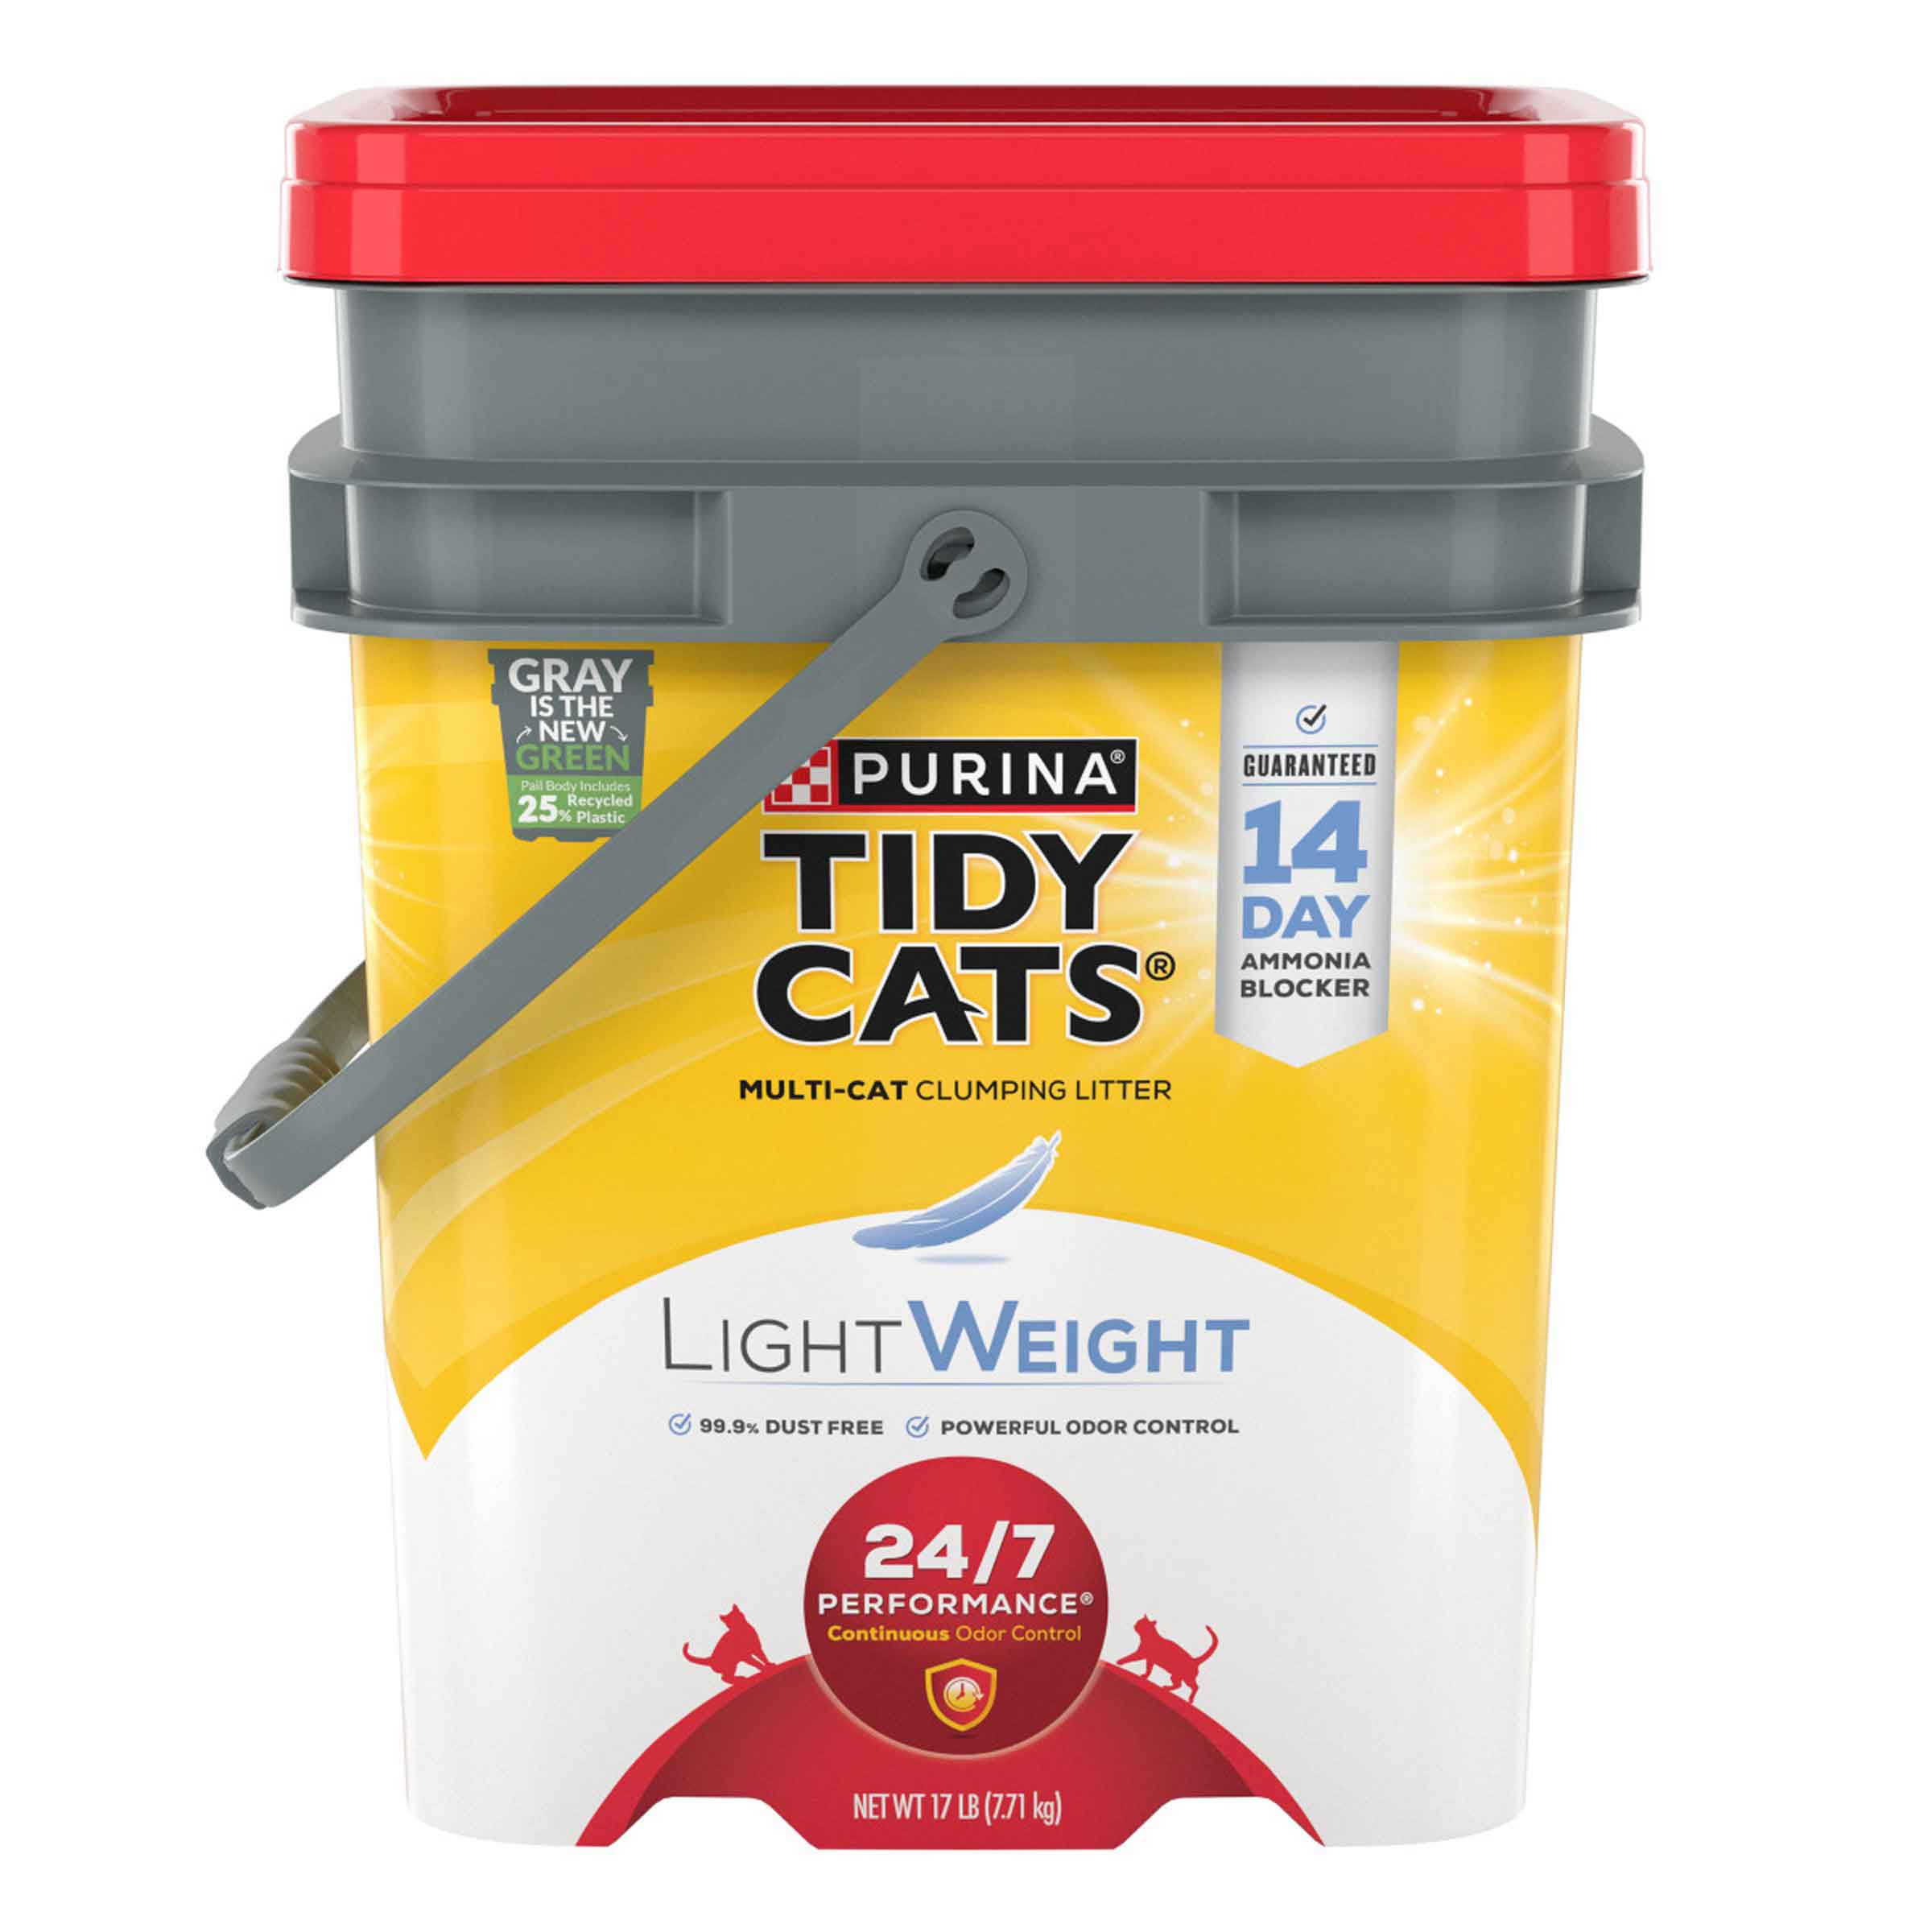 Purina Tidy Cats Light Weight, Low Dust, Clumping Cat Litter 24/7 Performance Multi Cat Litter - 17 Pound Pail